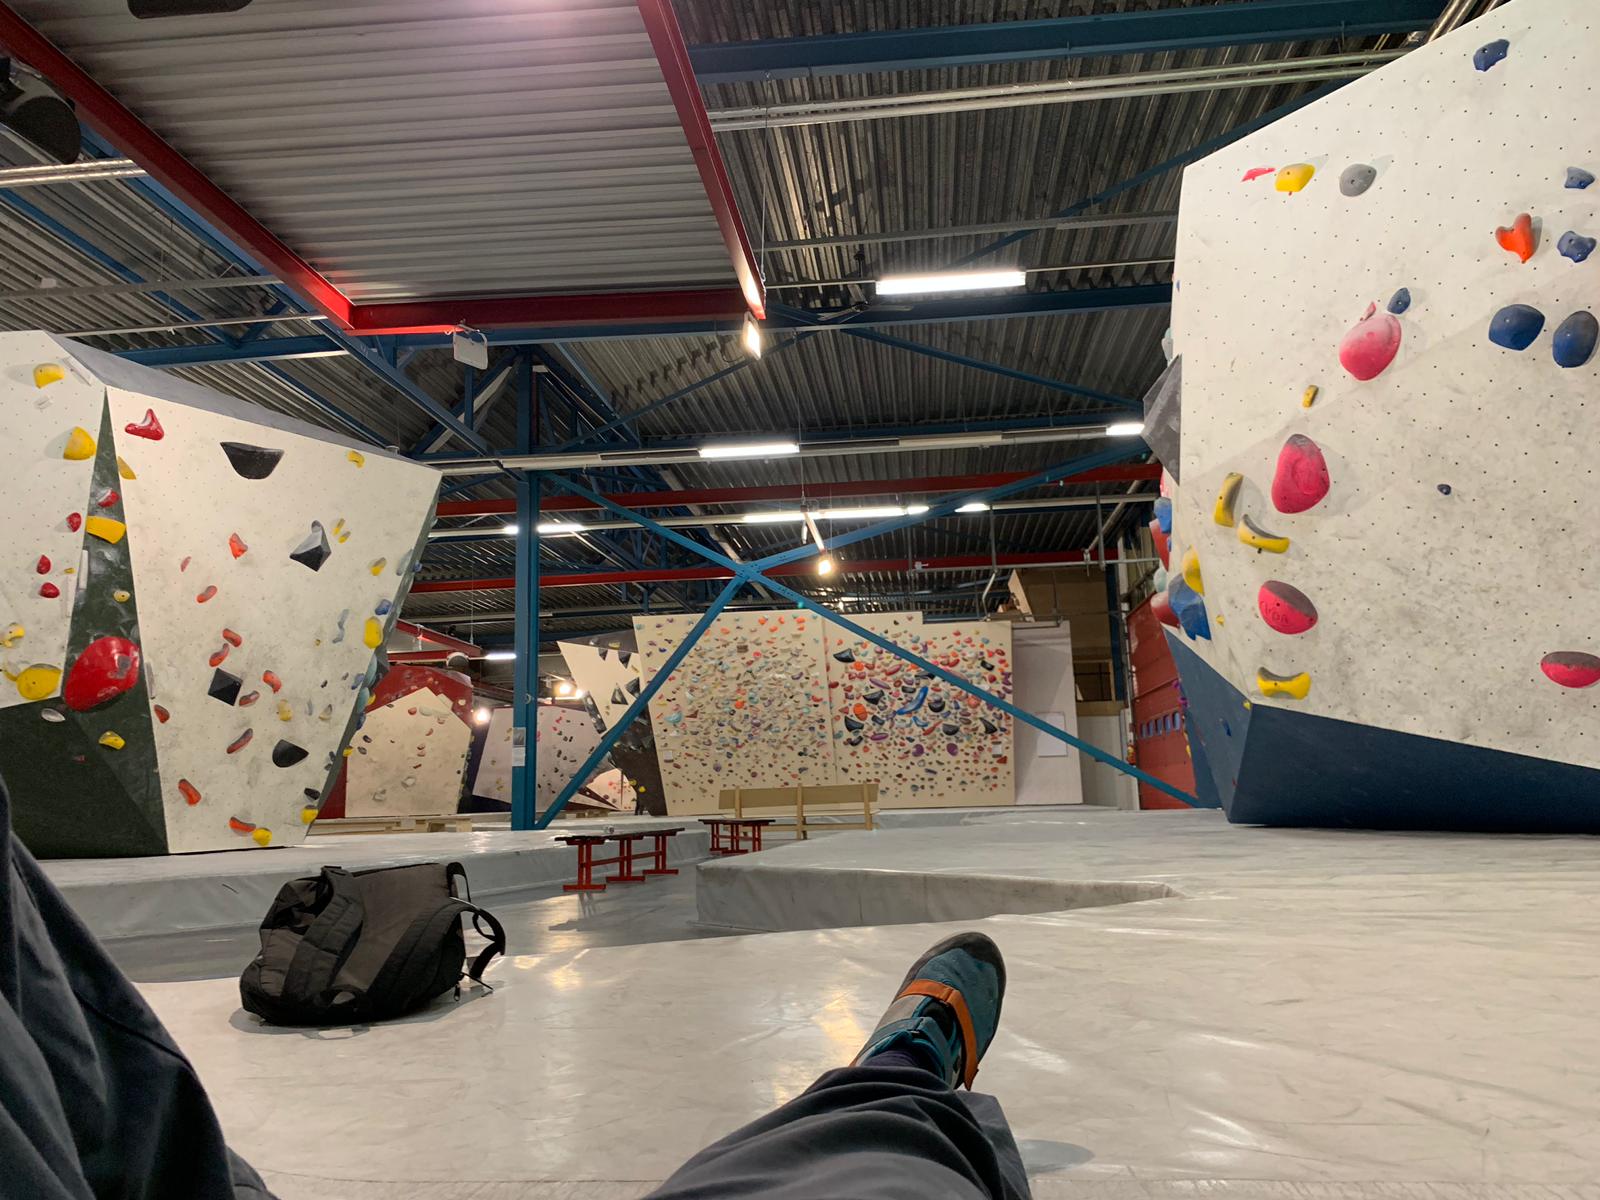 Bouldering Alone at an Empty Gym